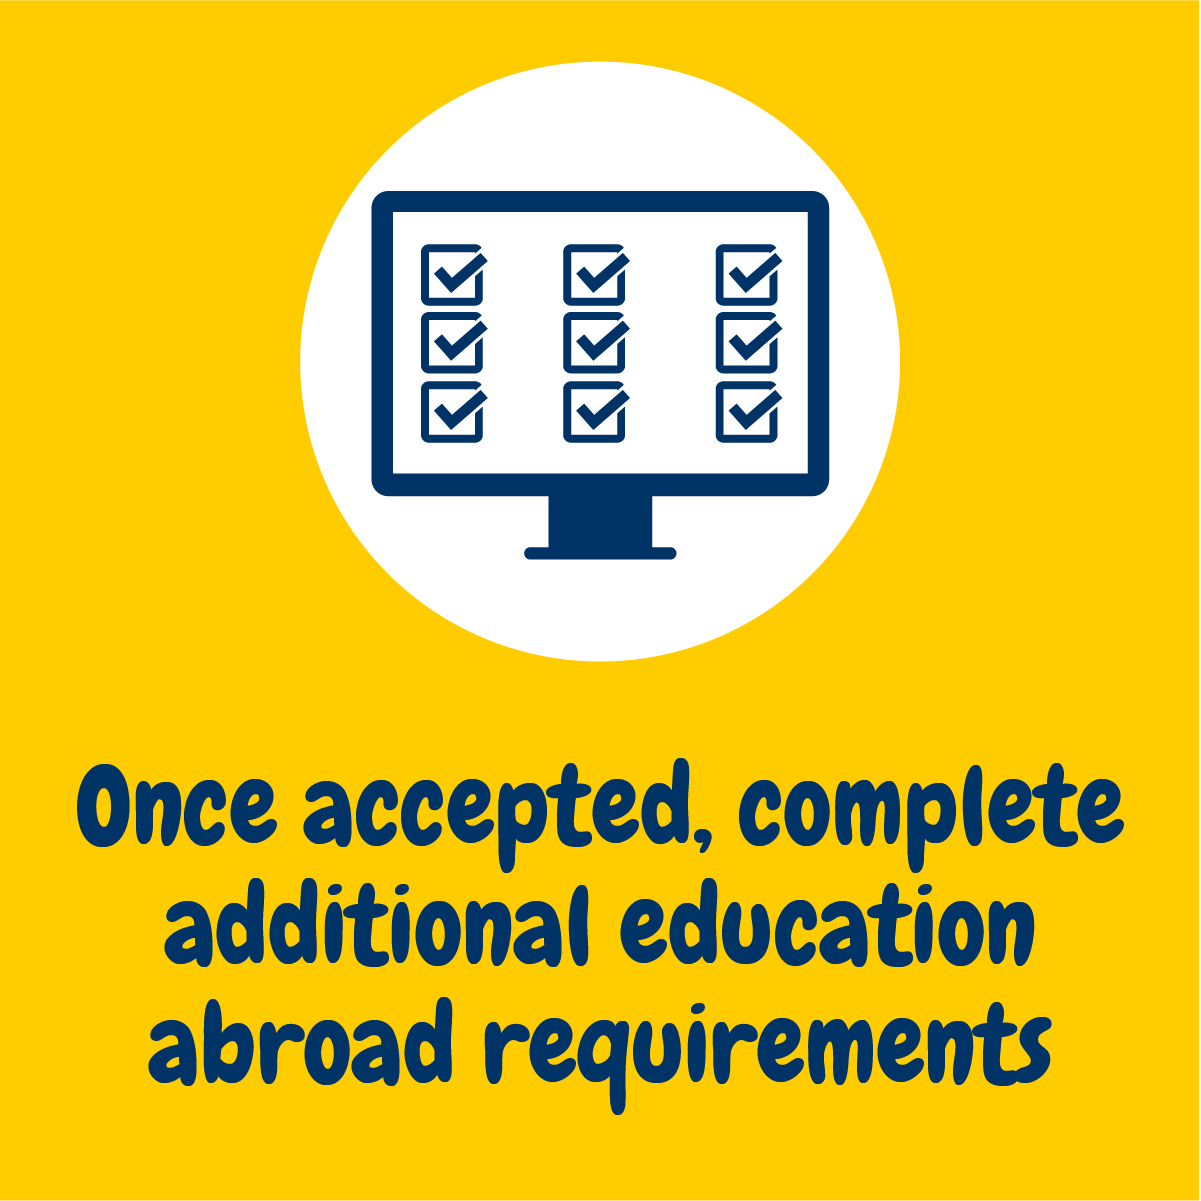 Once accepted, complete additional education abroad requirements